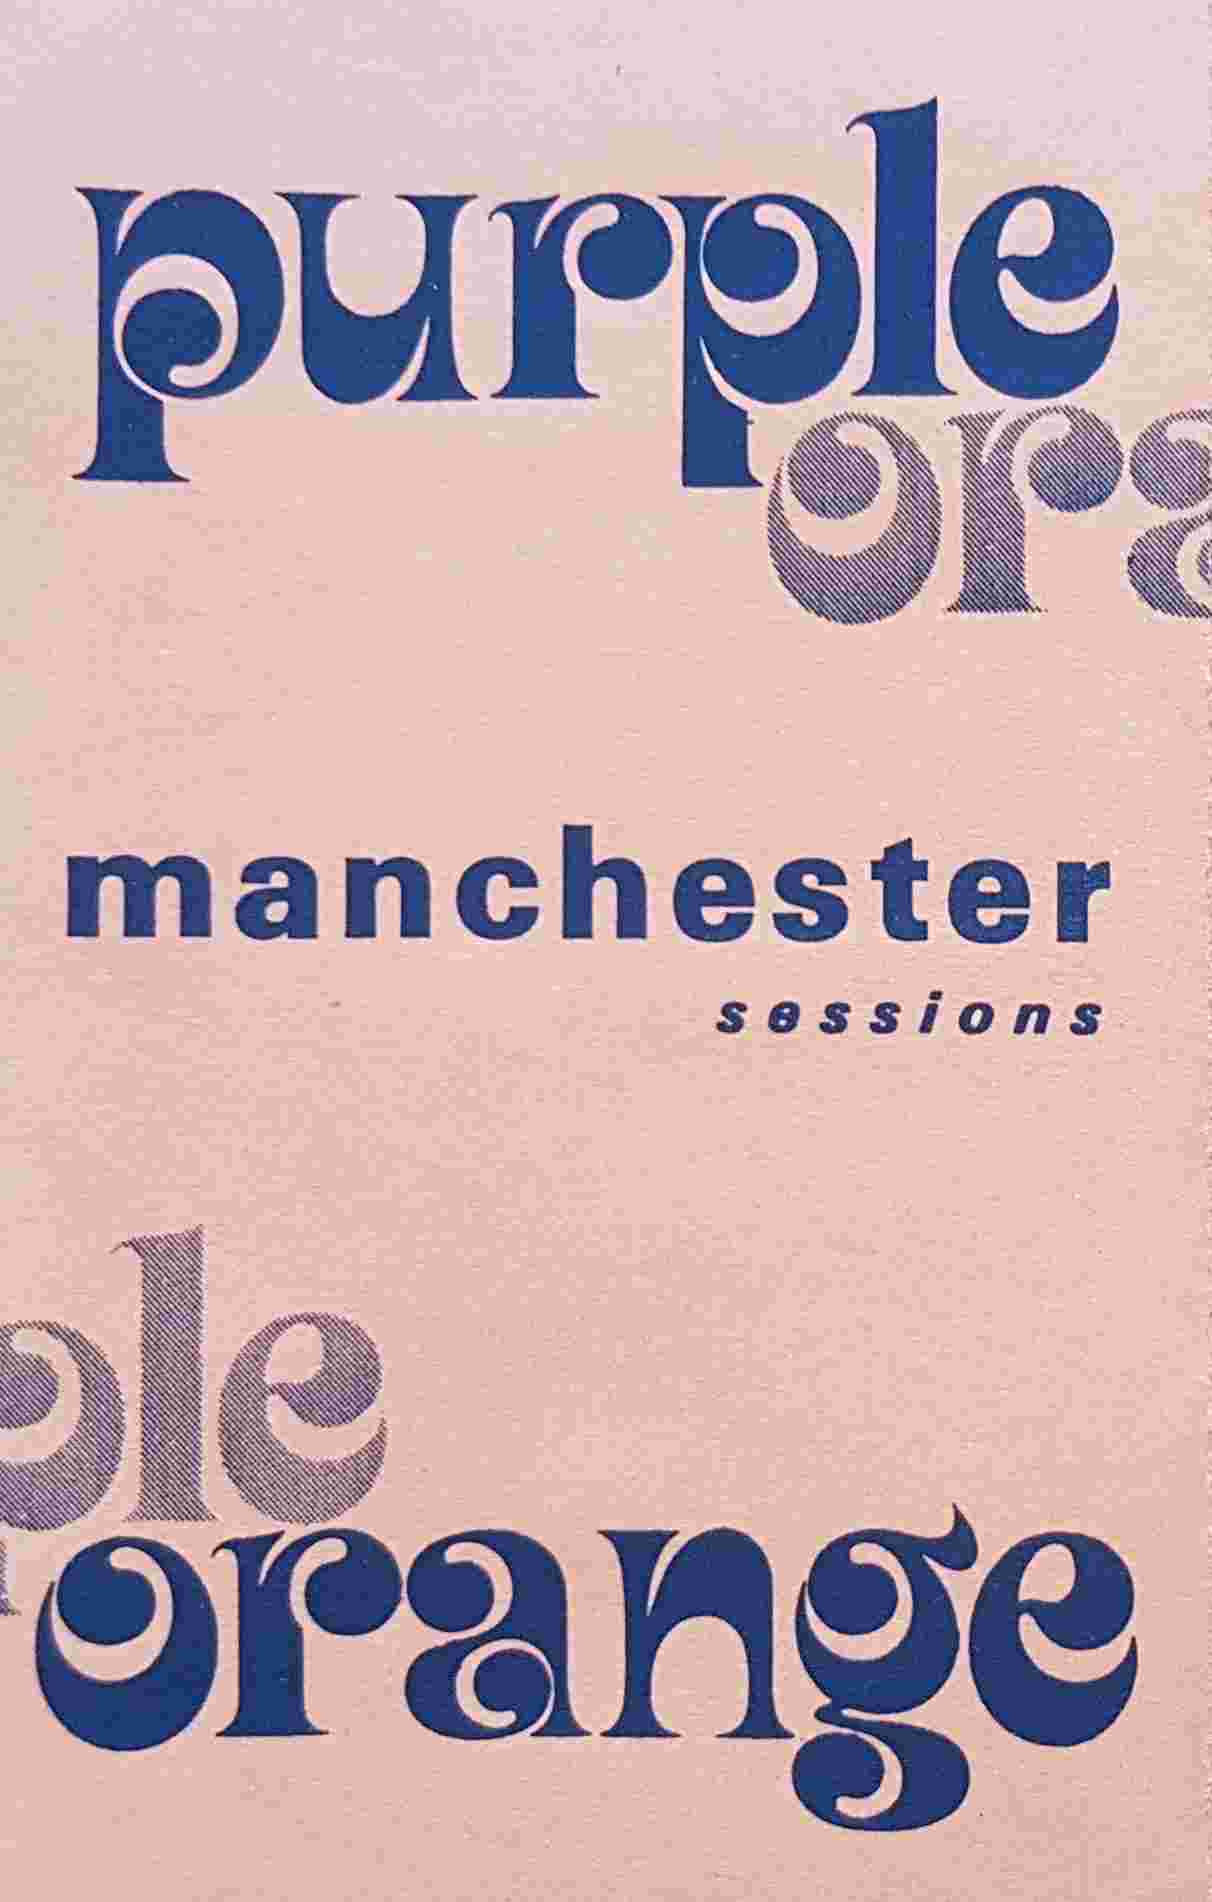 Picture of The Manchester sessions by artist Purple Orange 